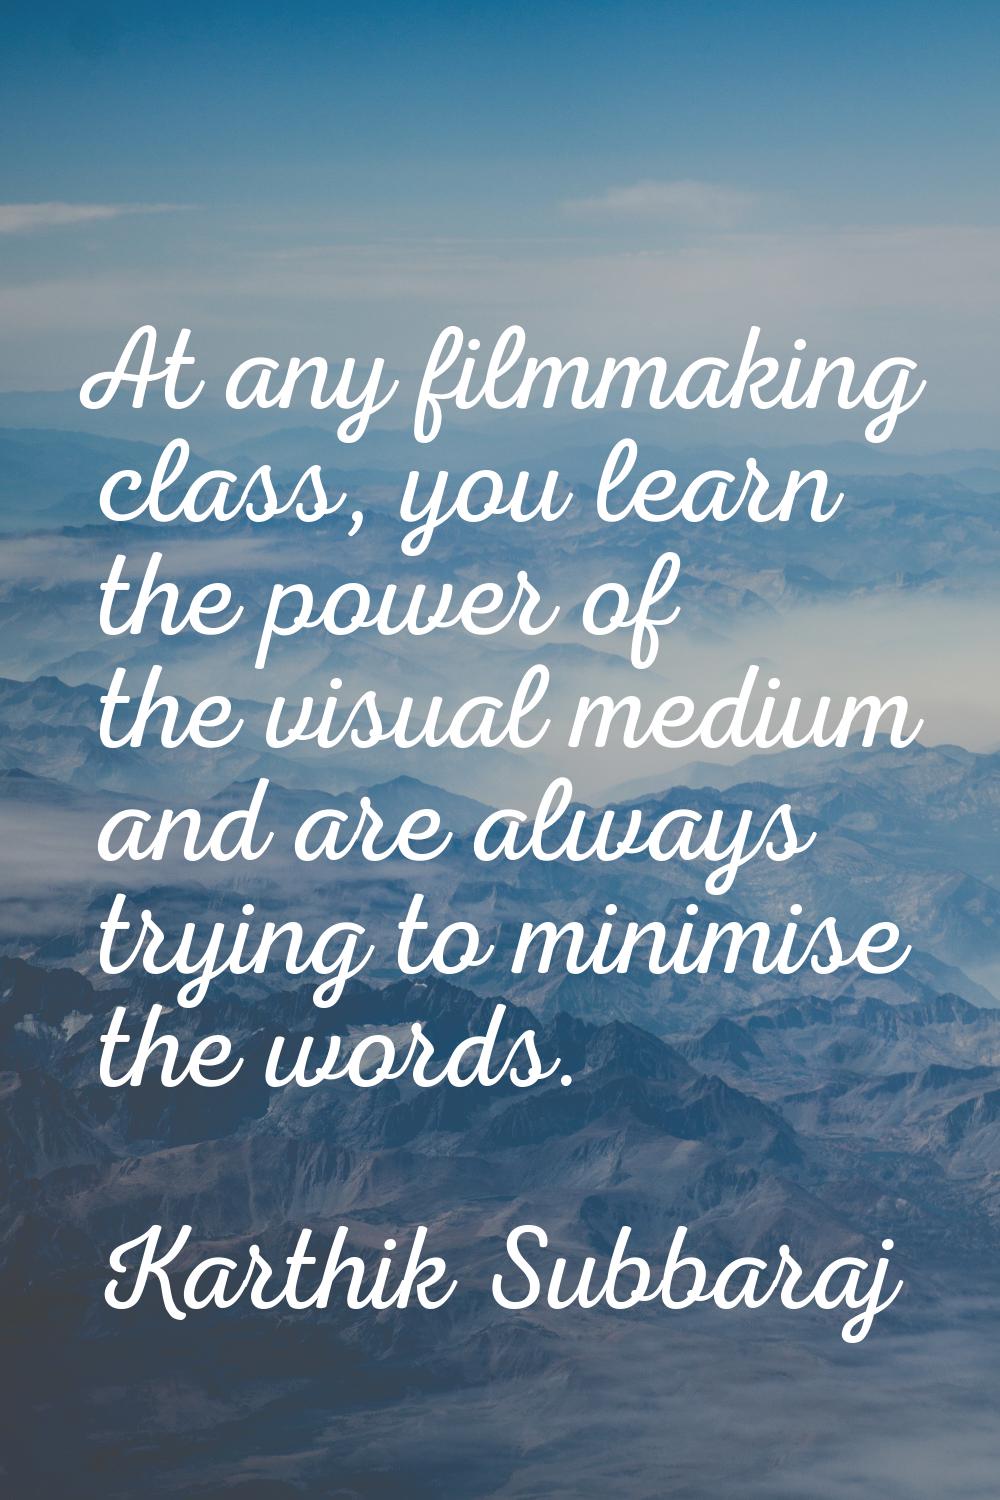 At any filmmaking class, you learn the power of the visual medium and are always trying to minimise